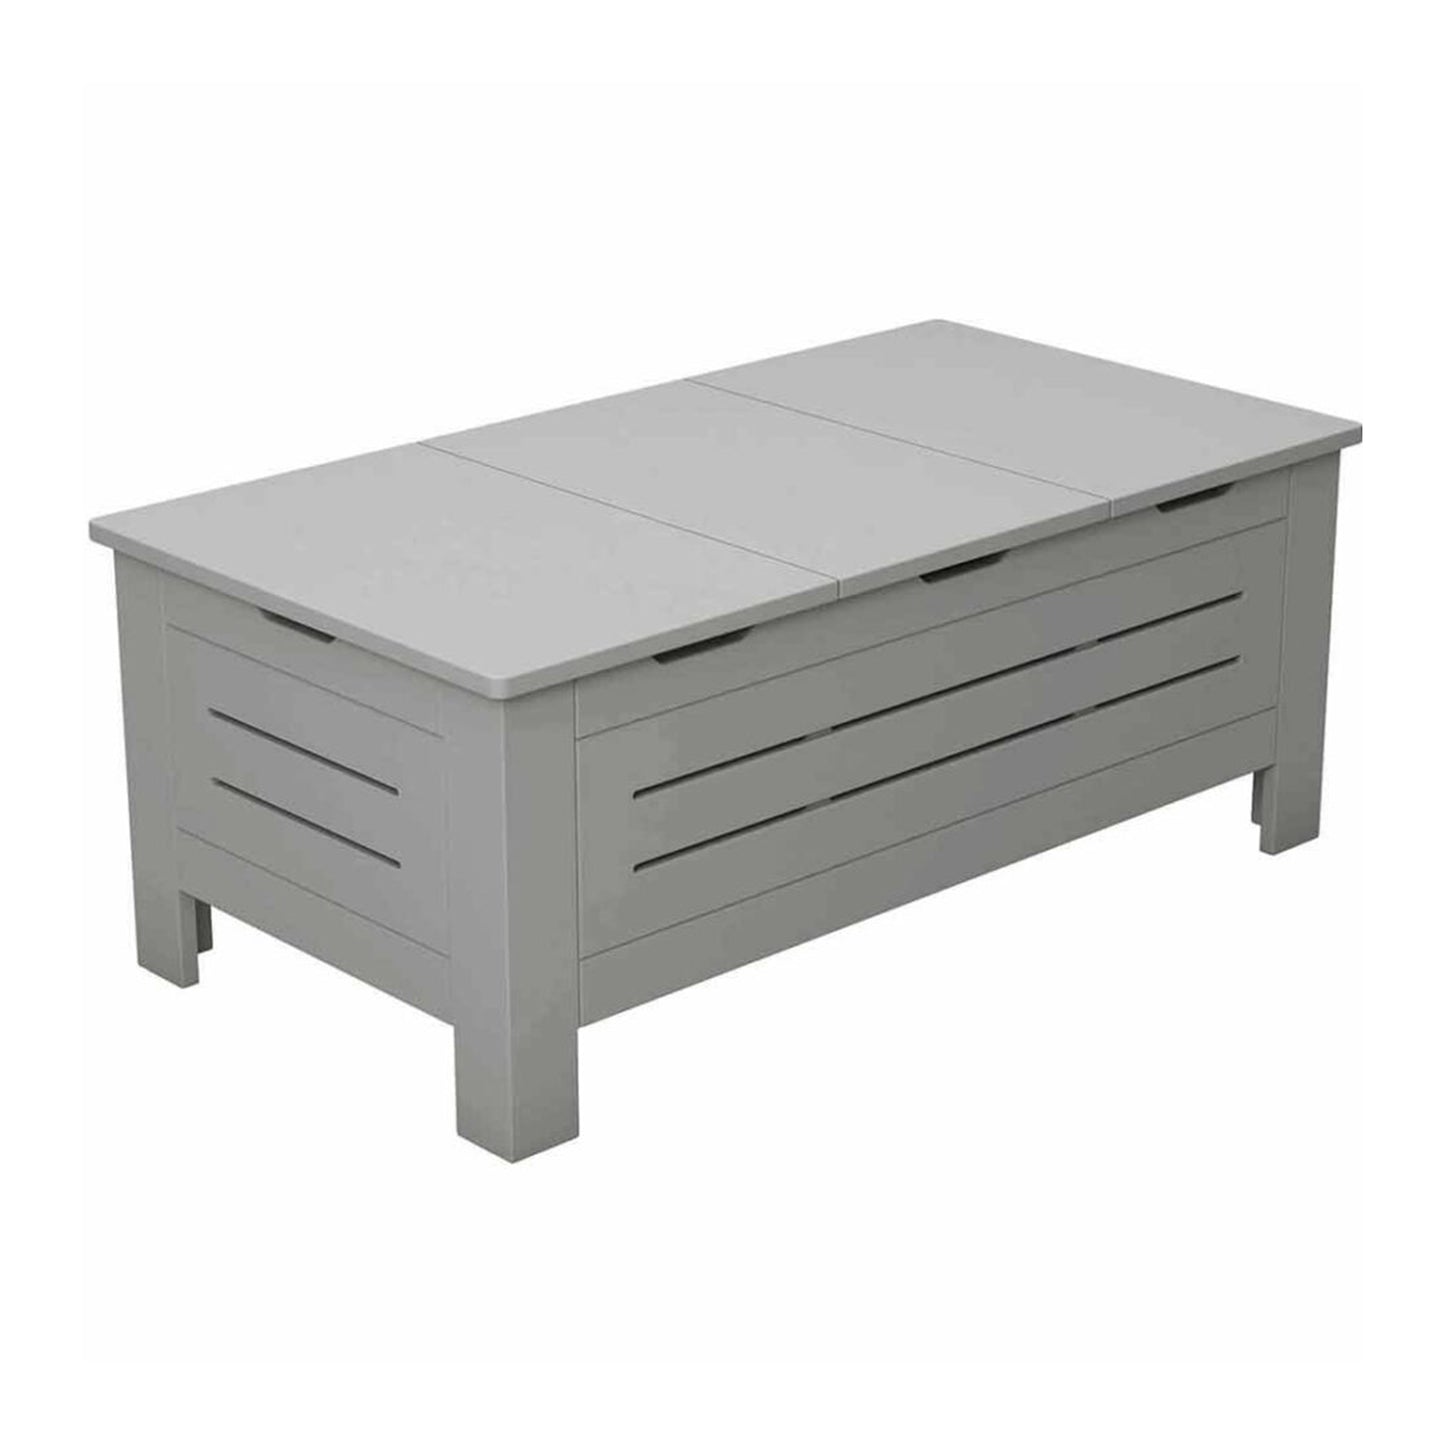 Ledge Lounger Mainstay Outdoor Storage Coffee Table